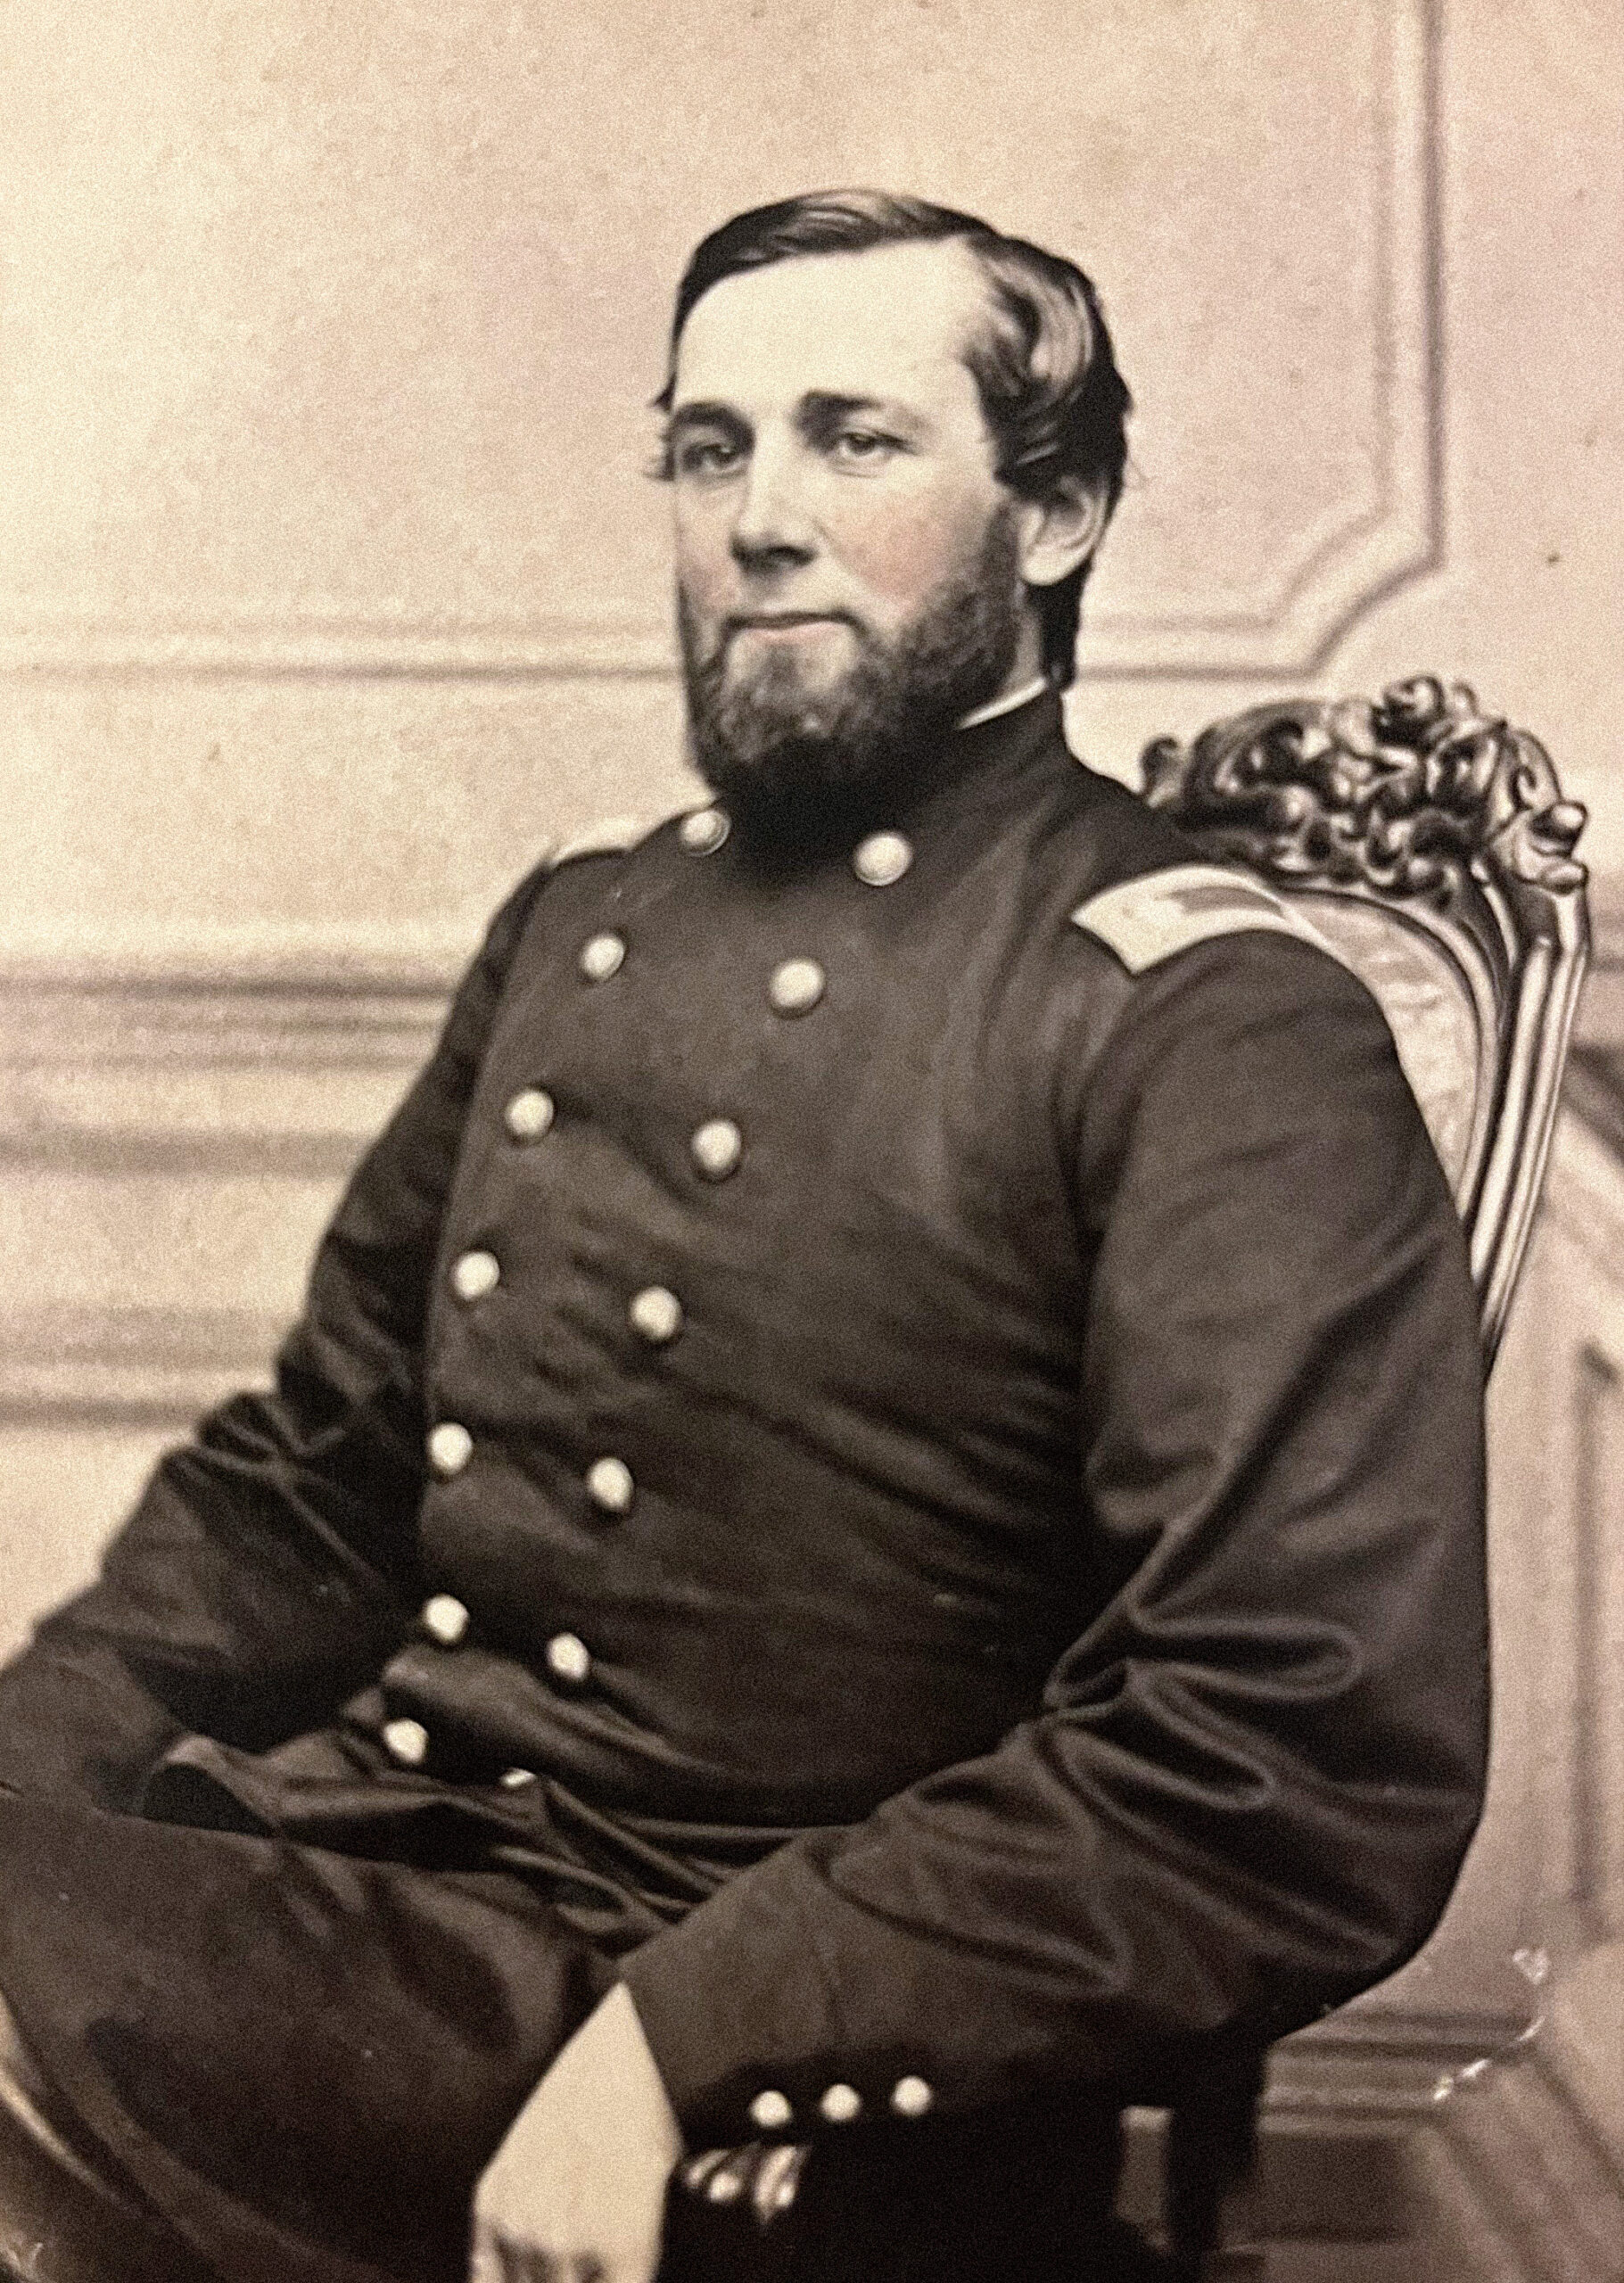 Civil War Hero Milton Littlefield Turned to a Life of Crime